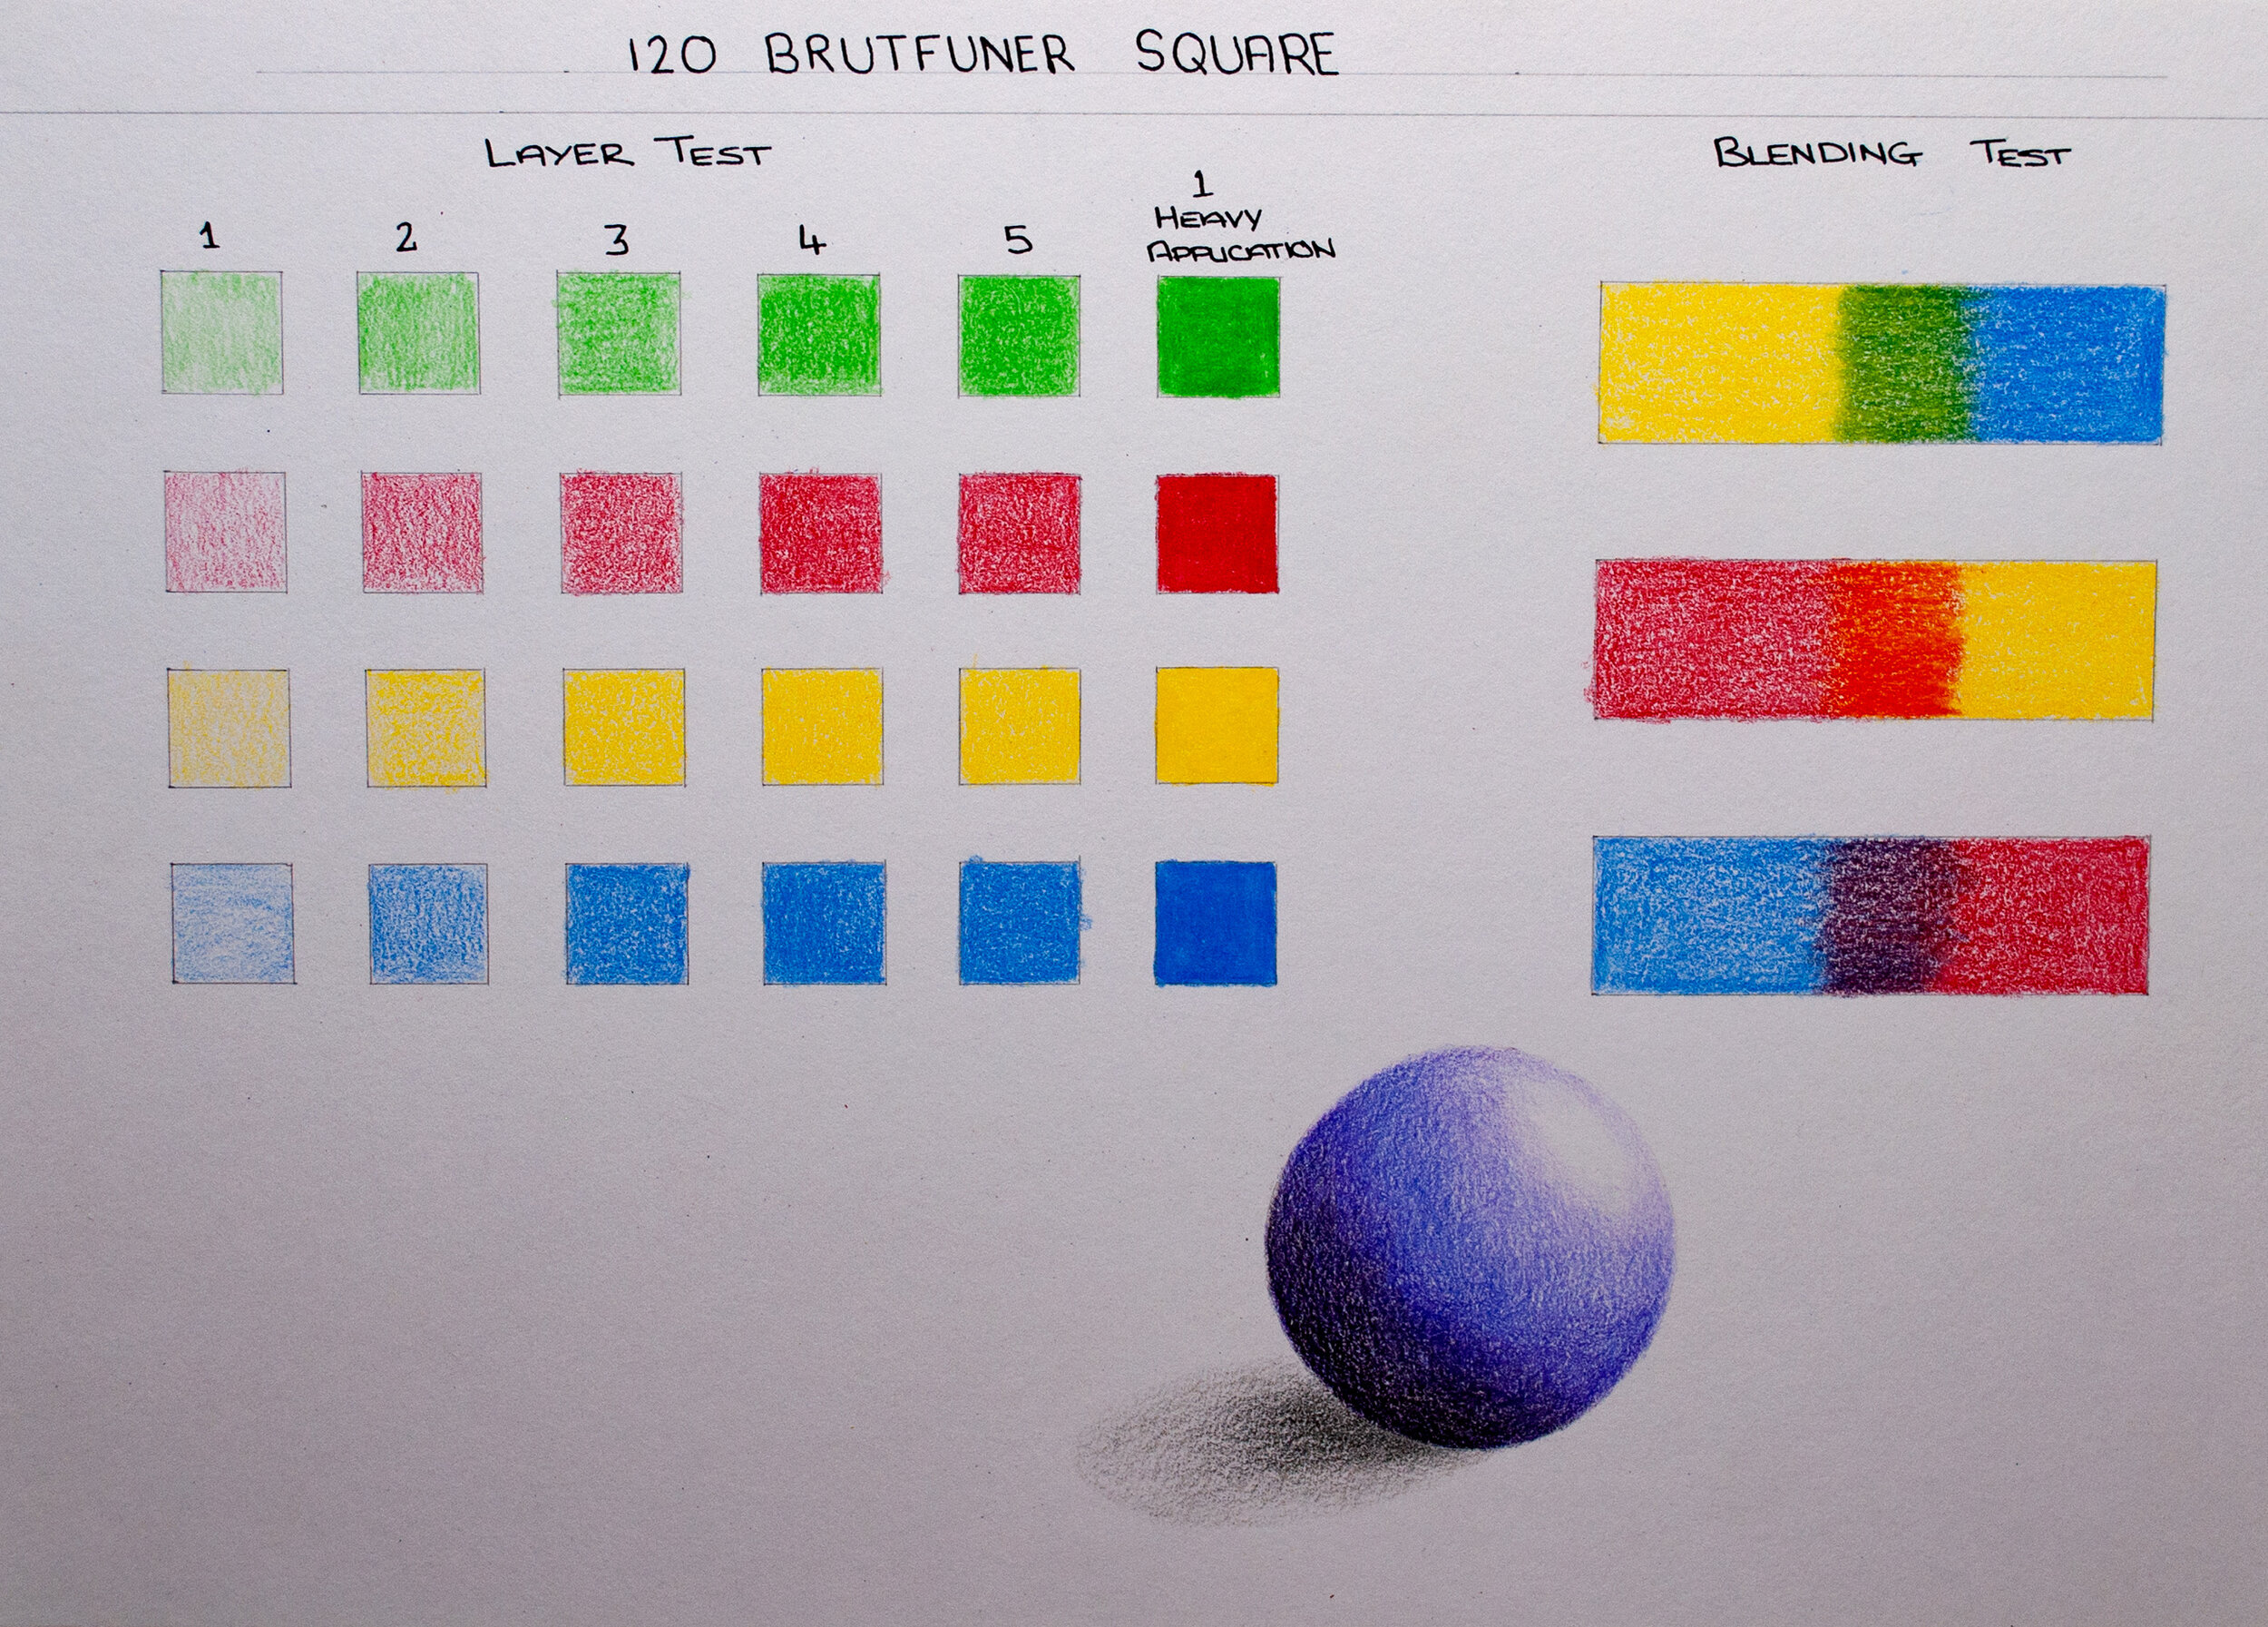 Brutfuner 120 Square Colored Pencil Review - Are These Cheap Oily